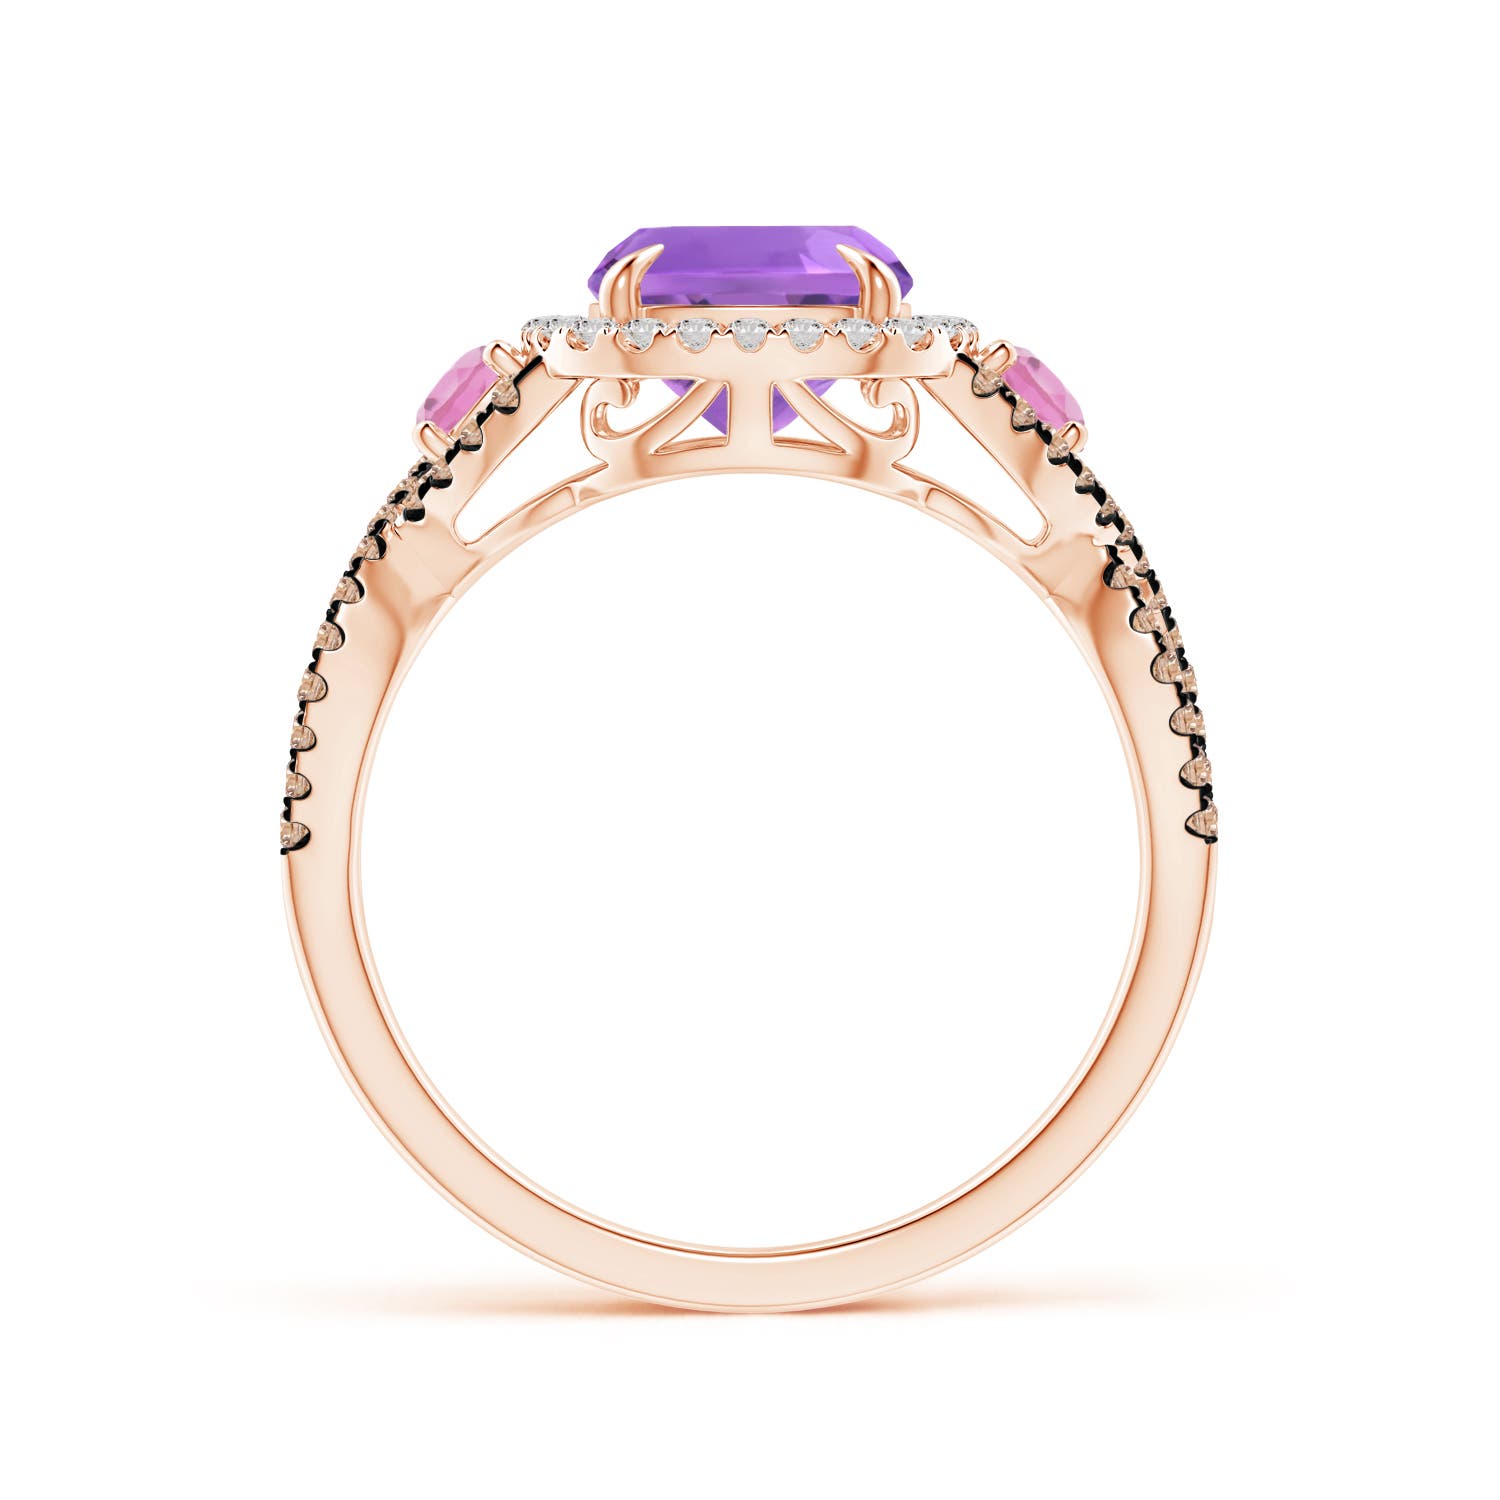 AA - Amethyst / 2.59 CT / 14 KT Rose Gold